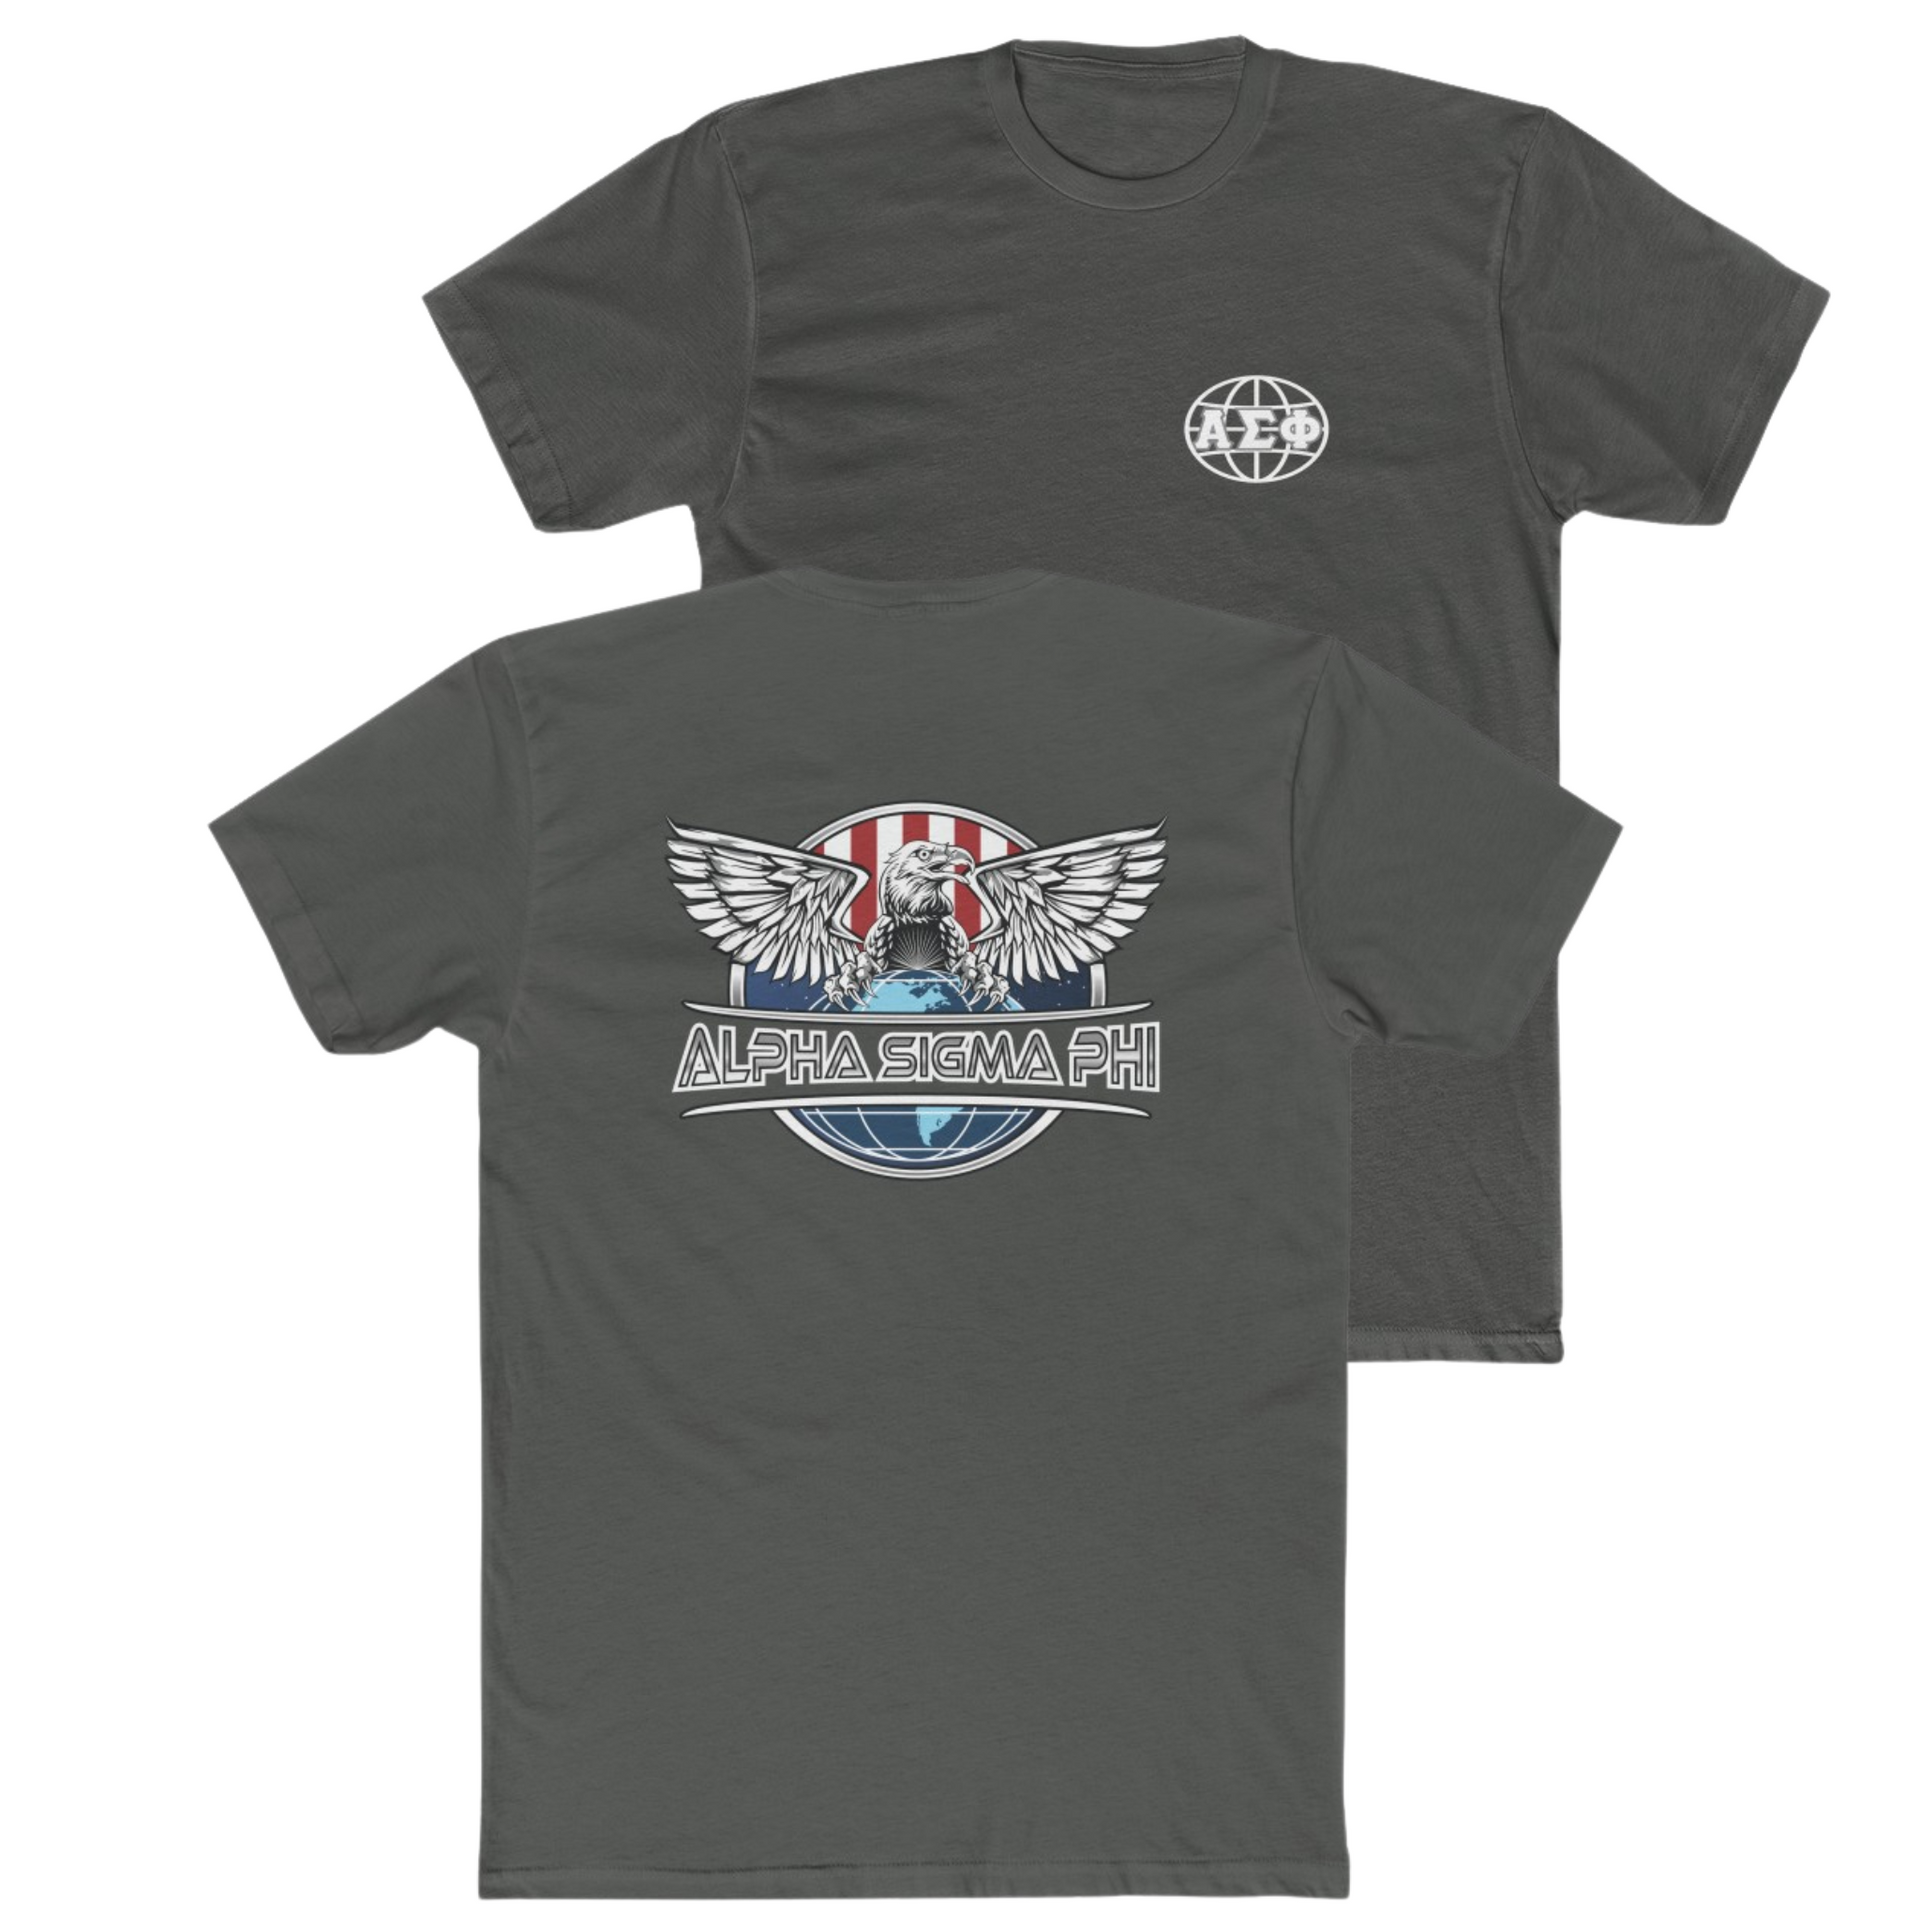 Grey Alpha Sigma Phi Graphic T-Shirt | The Fraternal Order | Alpha Sigma Phi Fraternity Clothes 